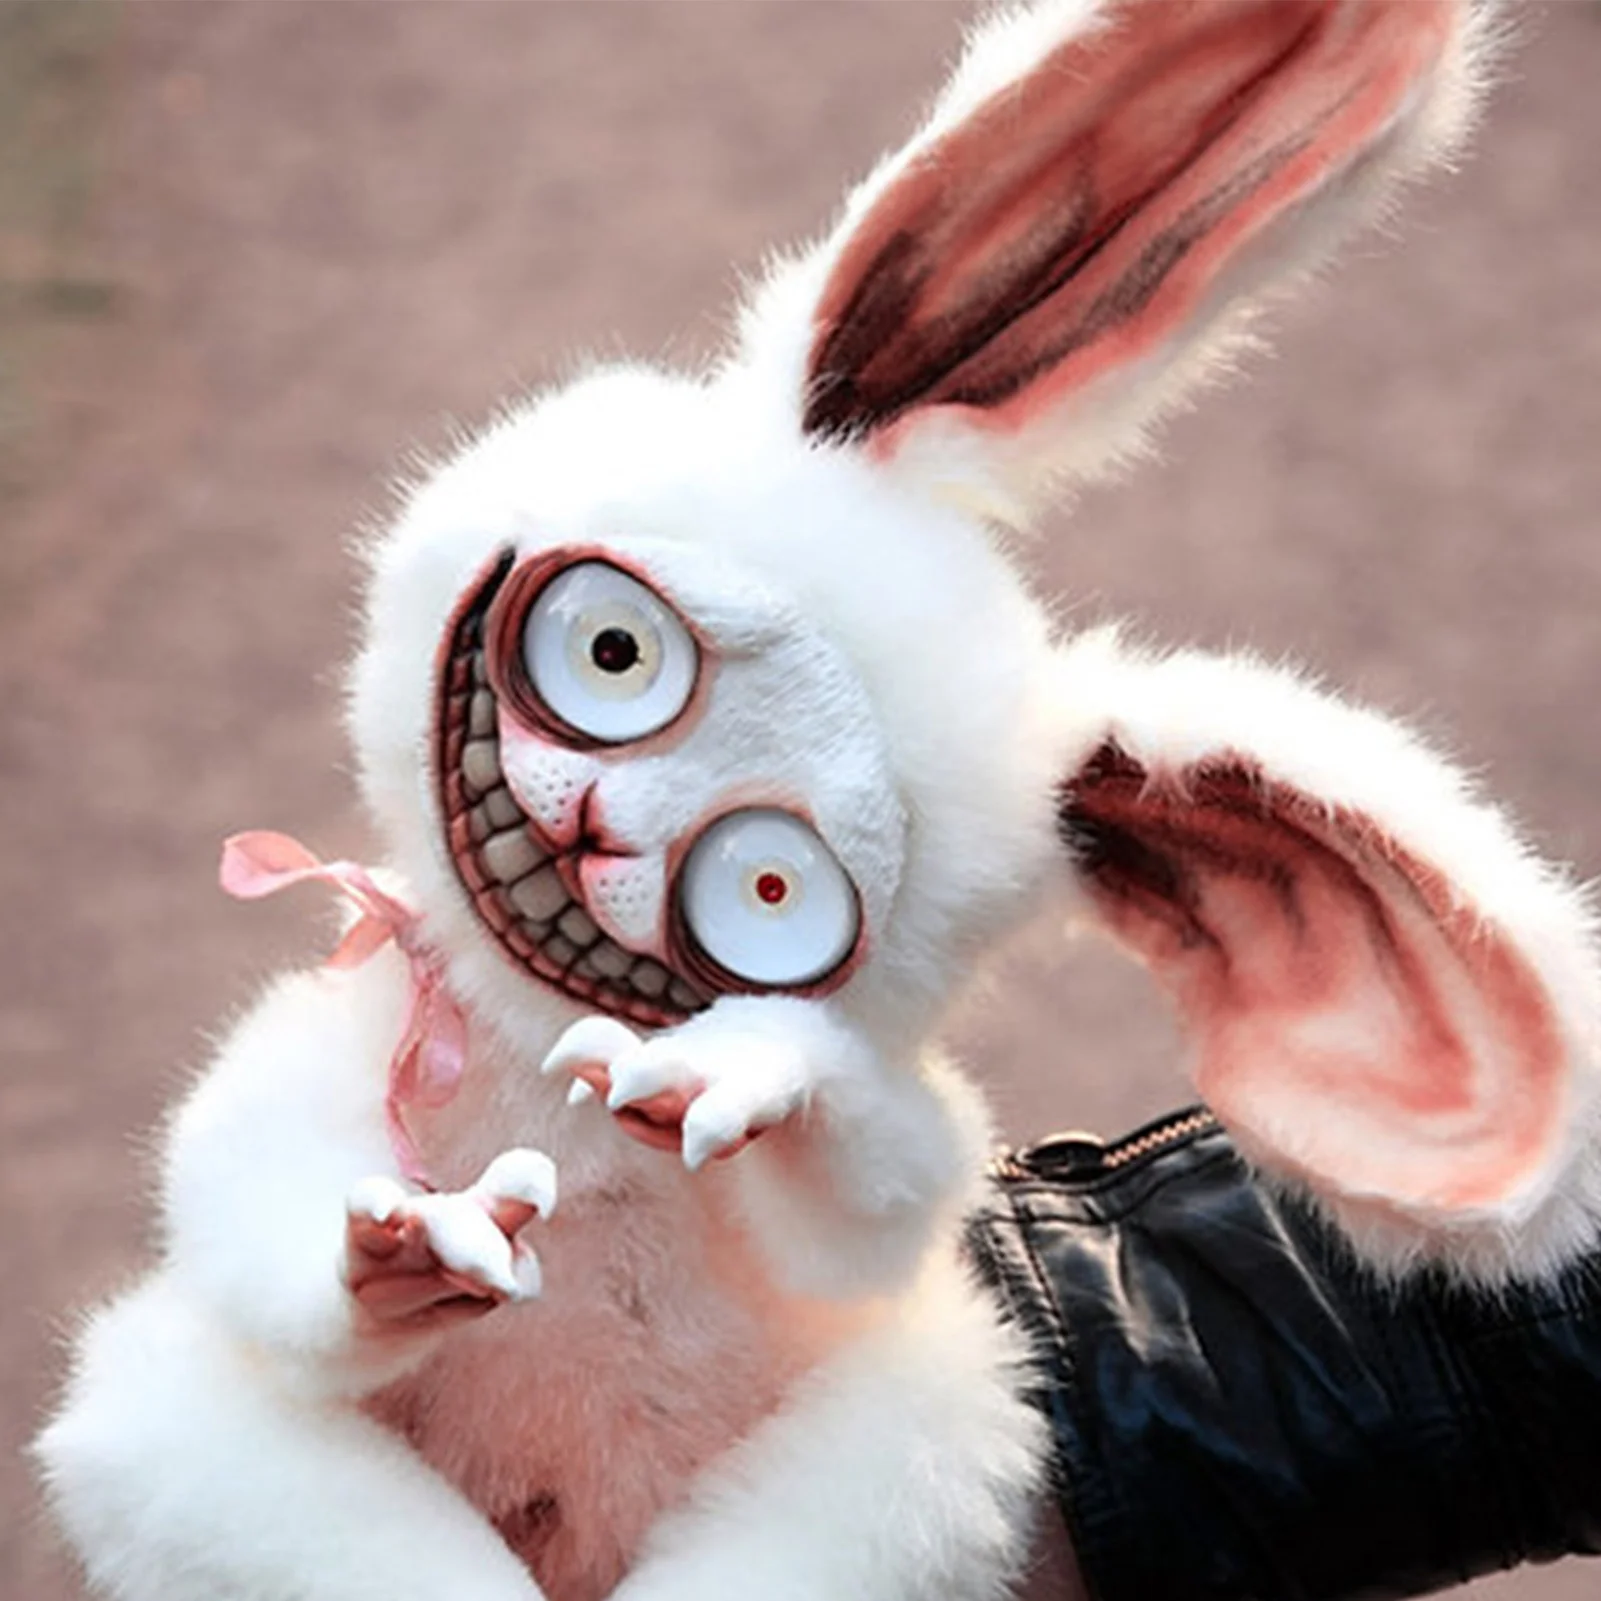 

30cm Crazy Bunny Plush Toy Scary Bunny Doll Horror Game Stuffed Rabbit Toys Birthday Gifts For Children Kids Simulation Rabbits